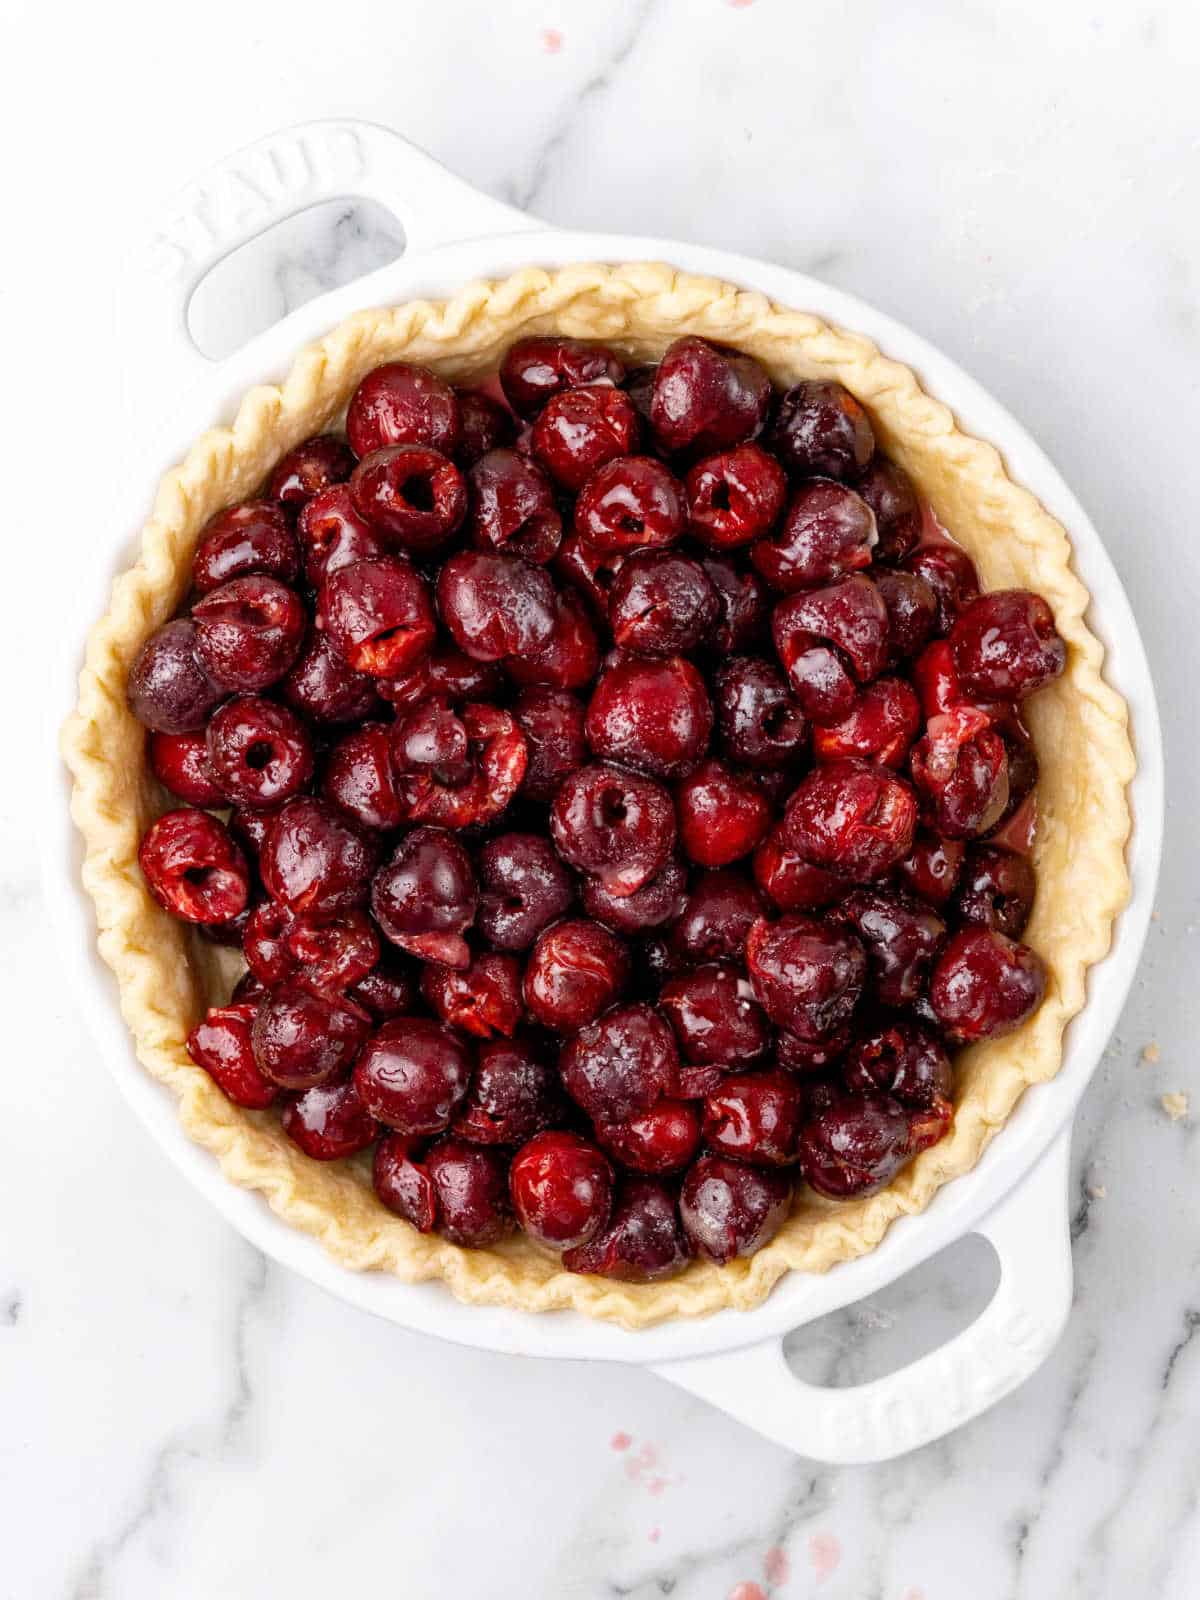 Fresh cherry pie filling in a white dish with a homemade crust. White marbled surface.